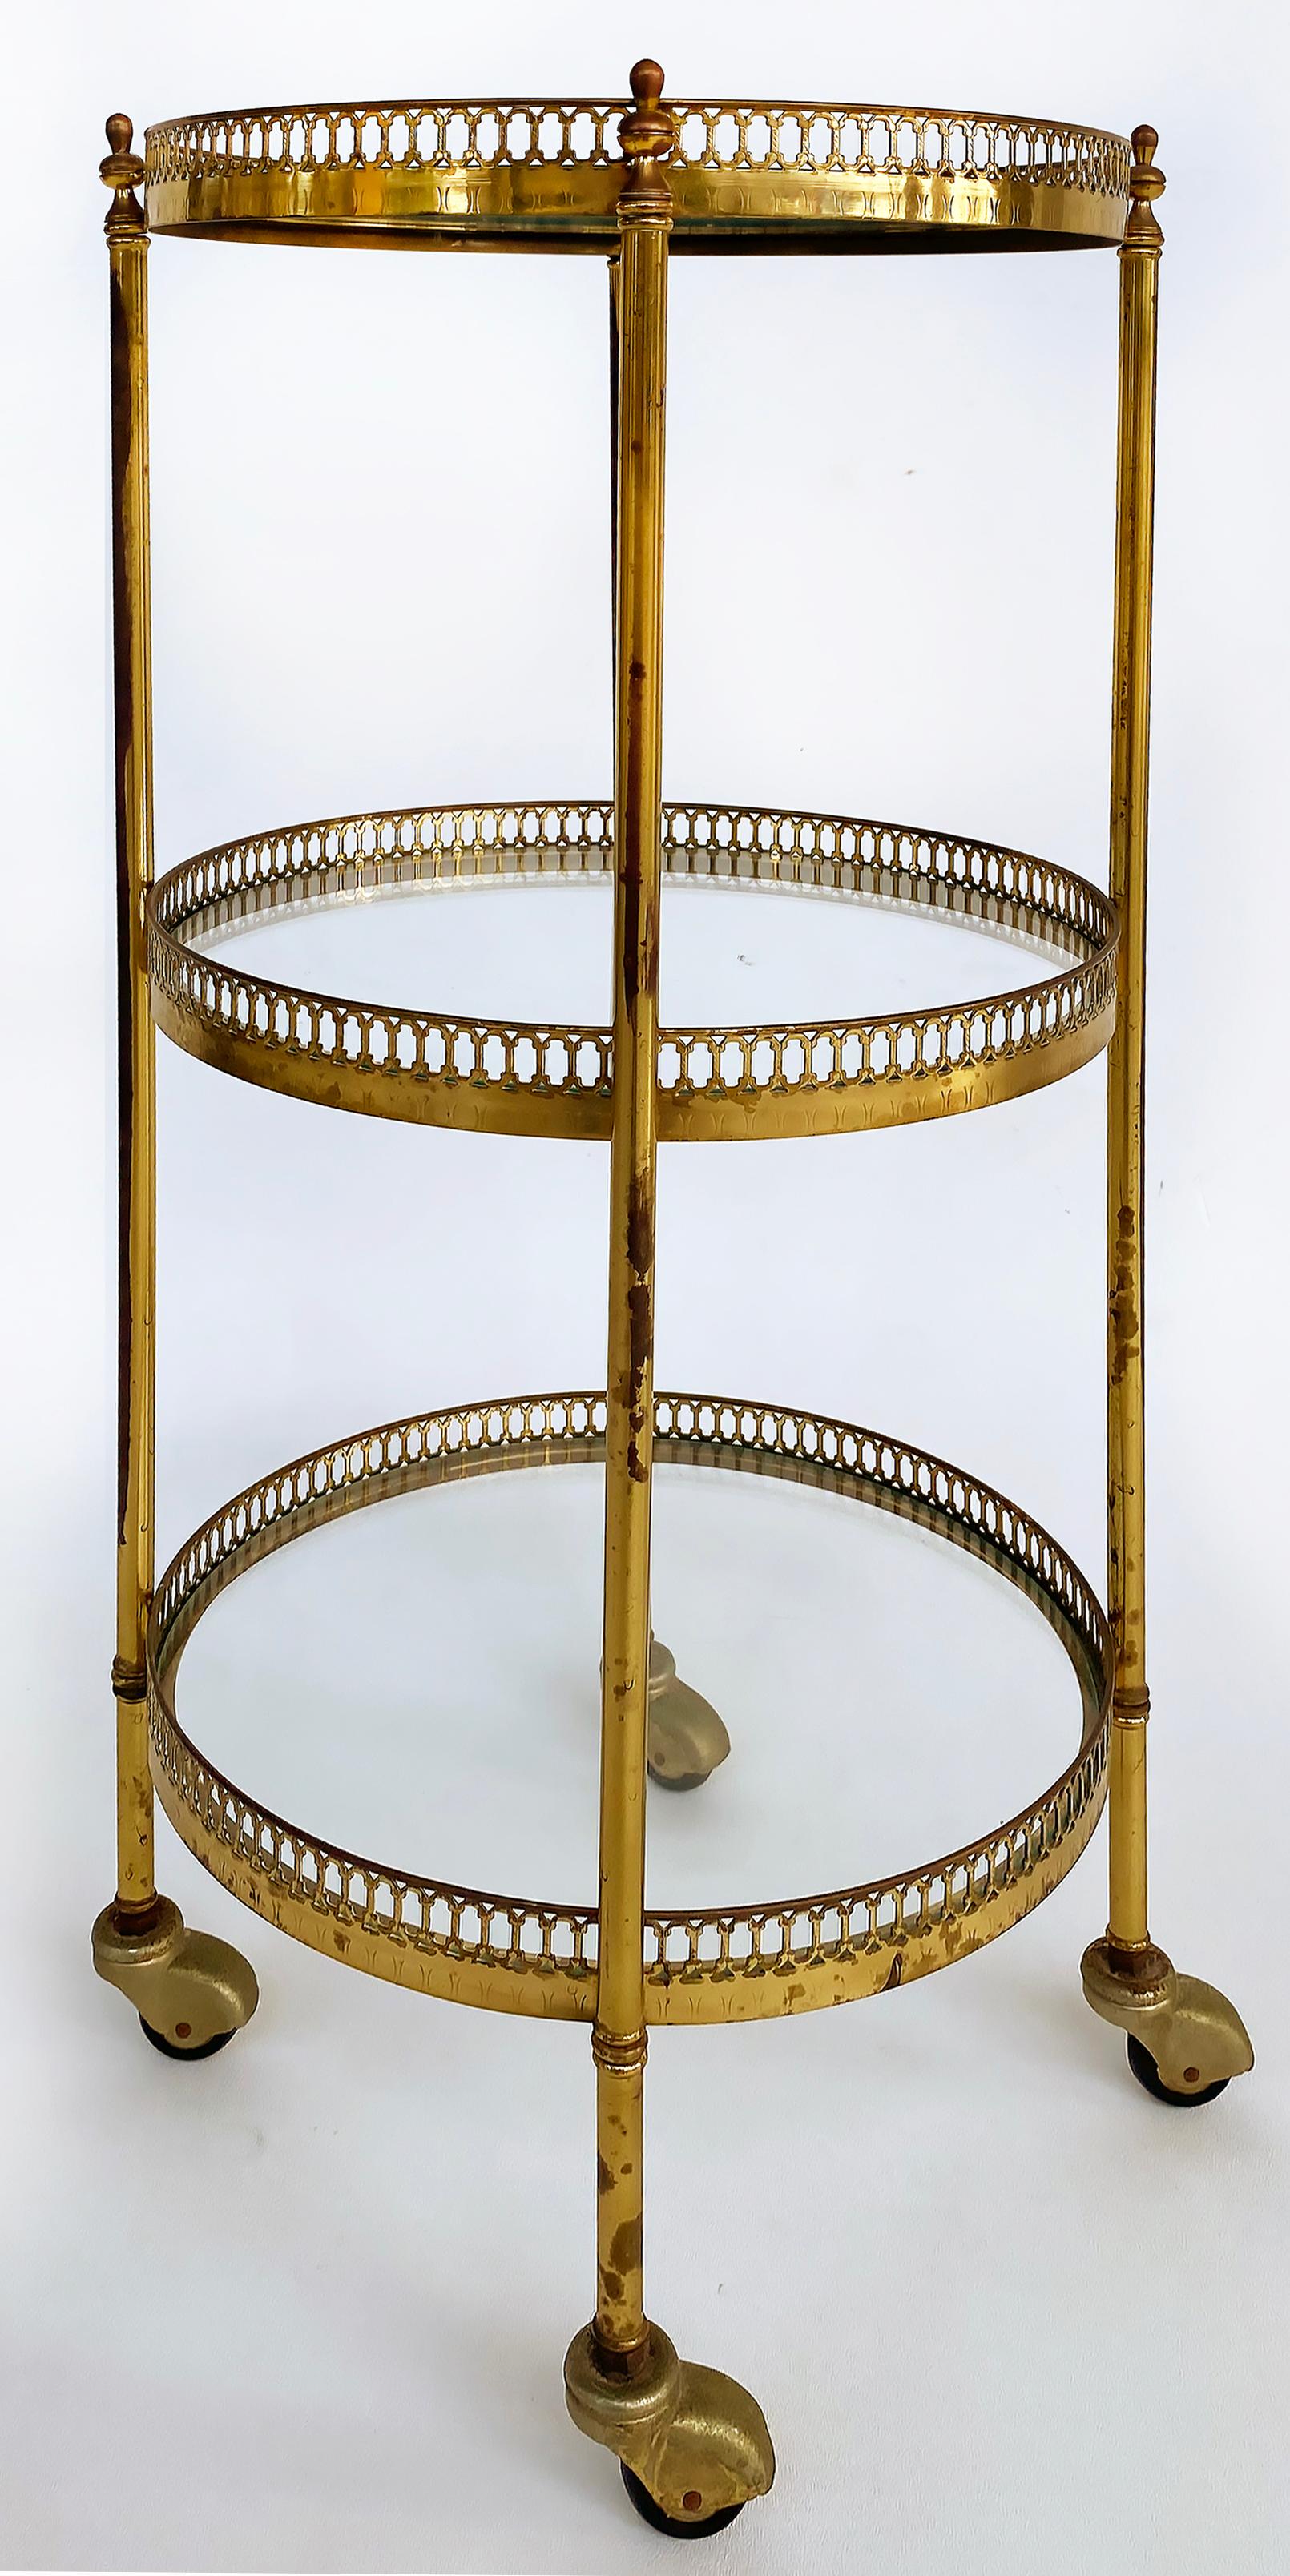 French Mid-century Modern 3-Tiered Brass and Glass Table on Casters

Offered for sale is a French mid-century modern three-tiered brass plated and glass round table on casters. The shelves have gallery rails for security. There are some areas of